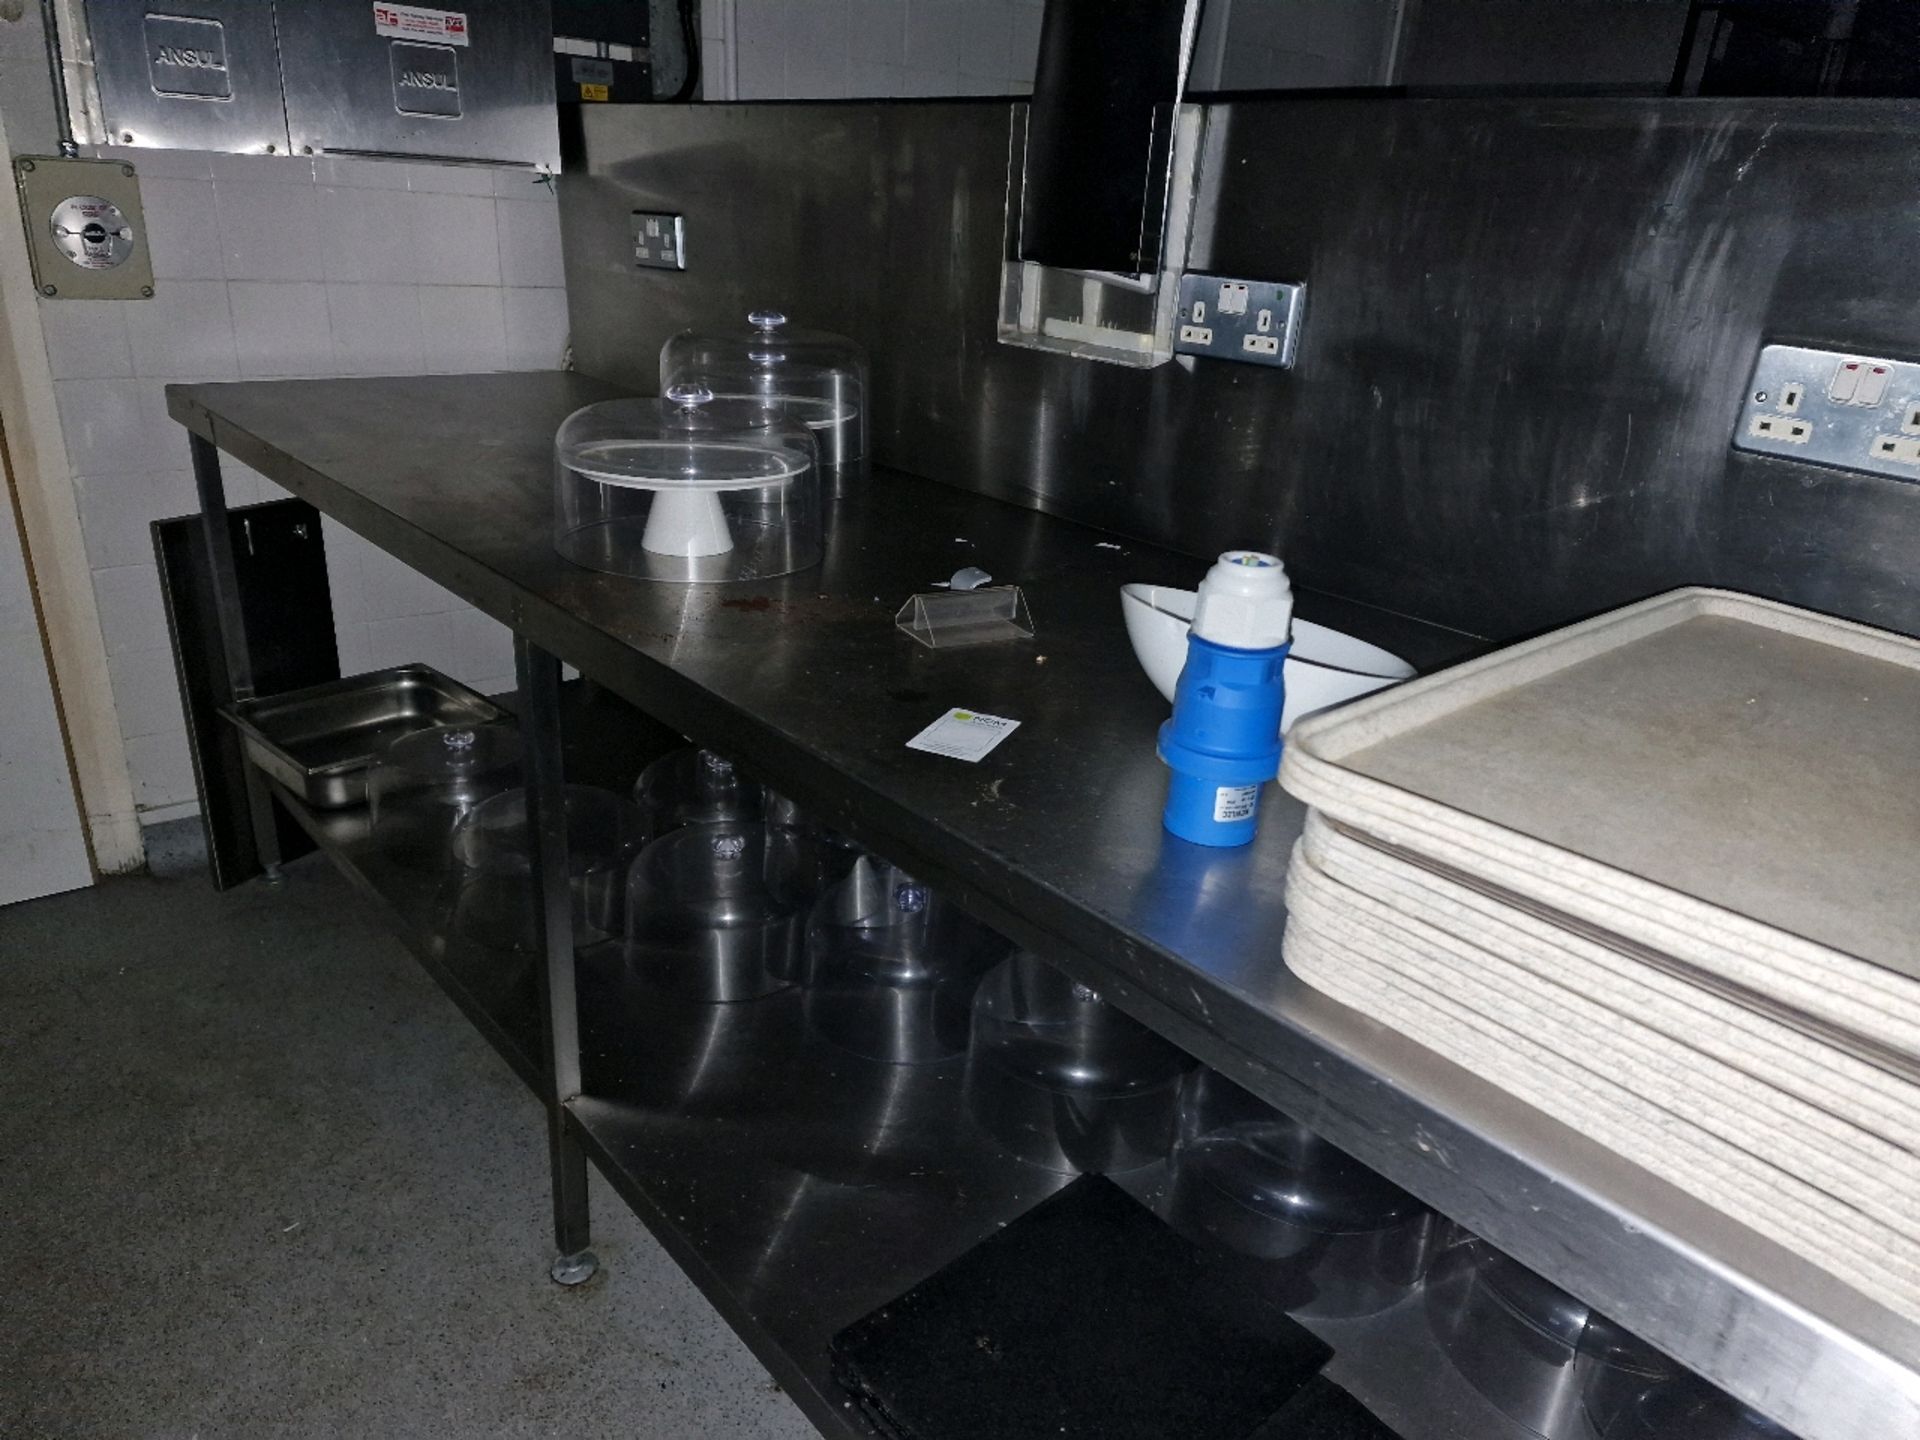 Stainless Steel Prep Station - Image 3 of 3